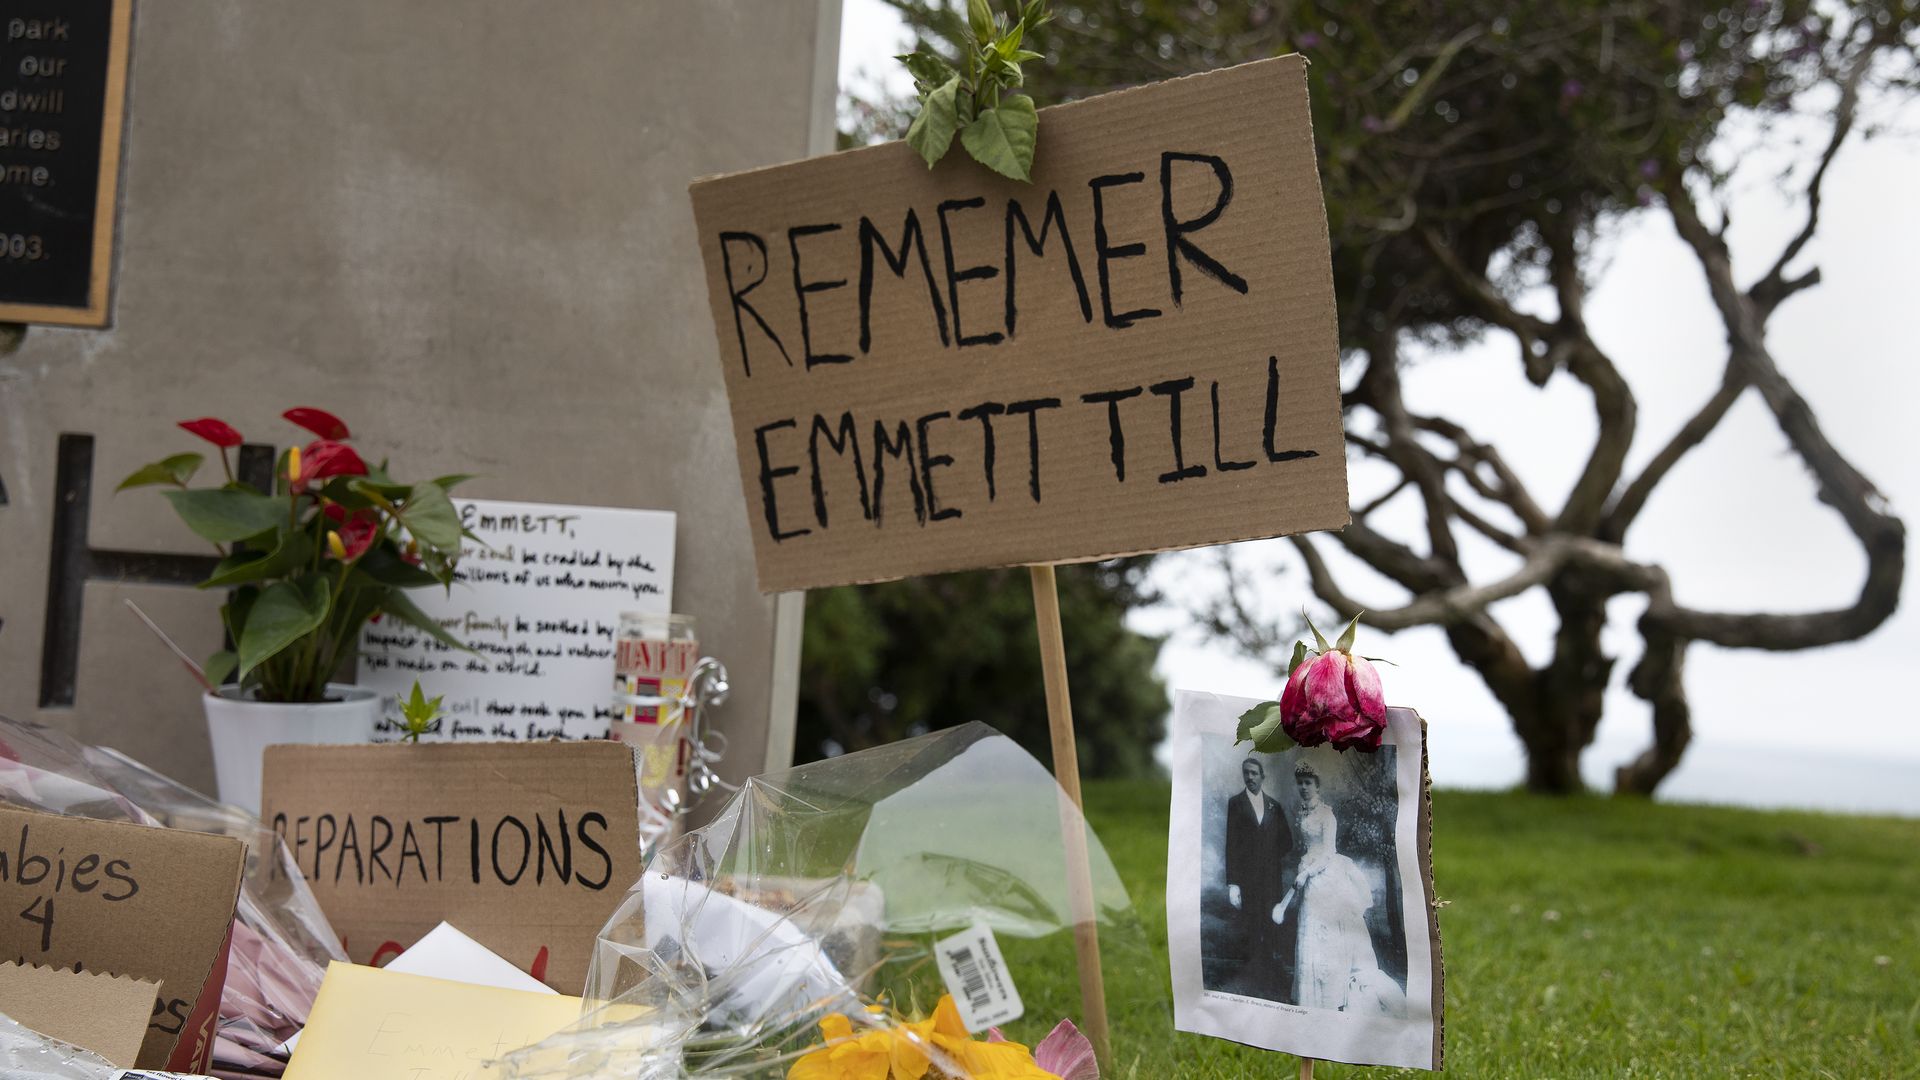 Photo of a memorial that shows flowers, photos and signs, one of which says "Remember Emmett Till"